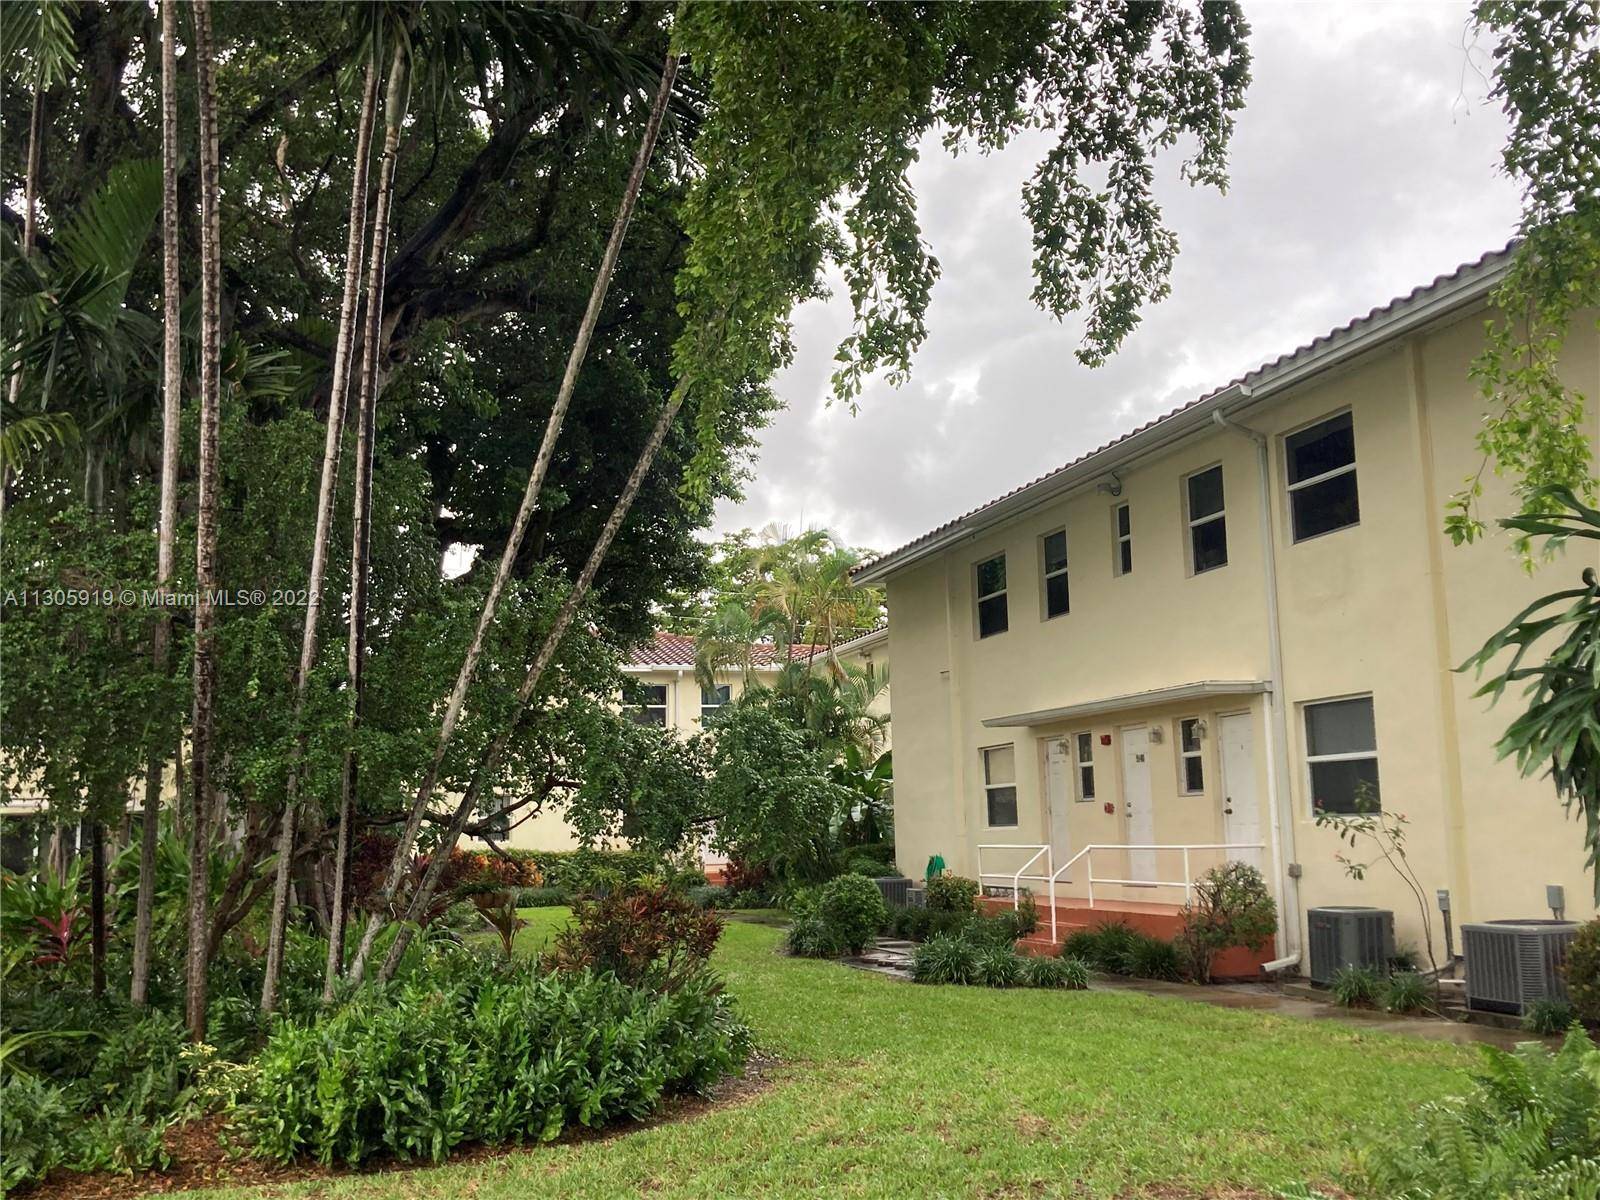 Beautiful landscaped condo features 1bedroom, 1 bath with 685 sq ft, located in adjacent Miami Shores, renovated cabinets, new appliances, modern bath, den office, plenty of space and walking closet, ...